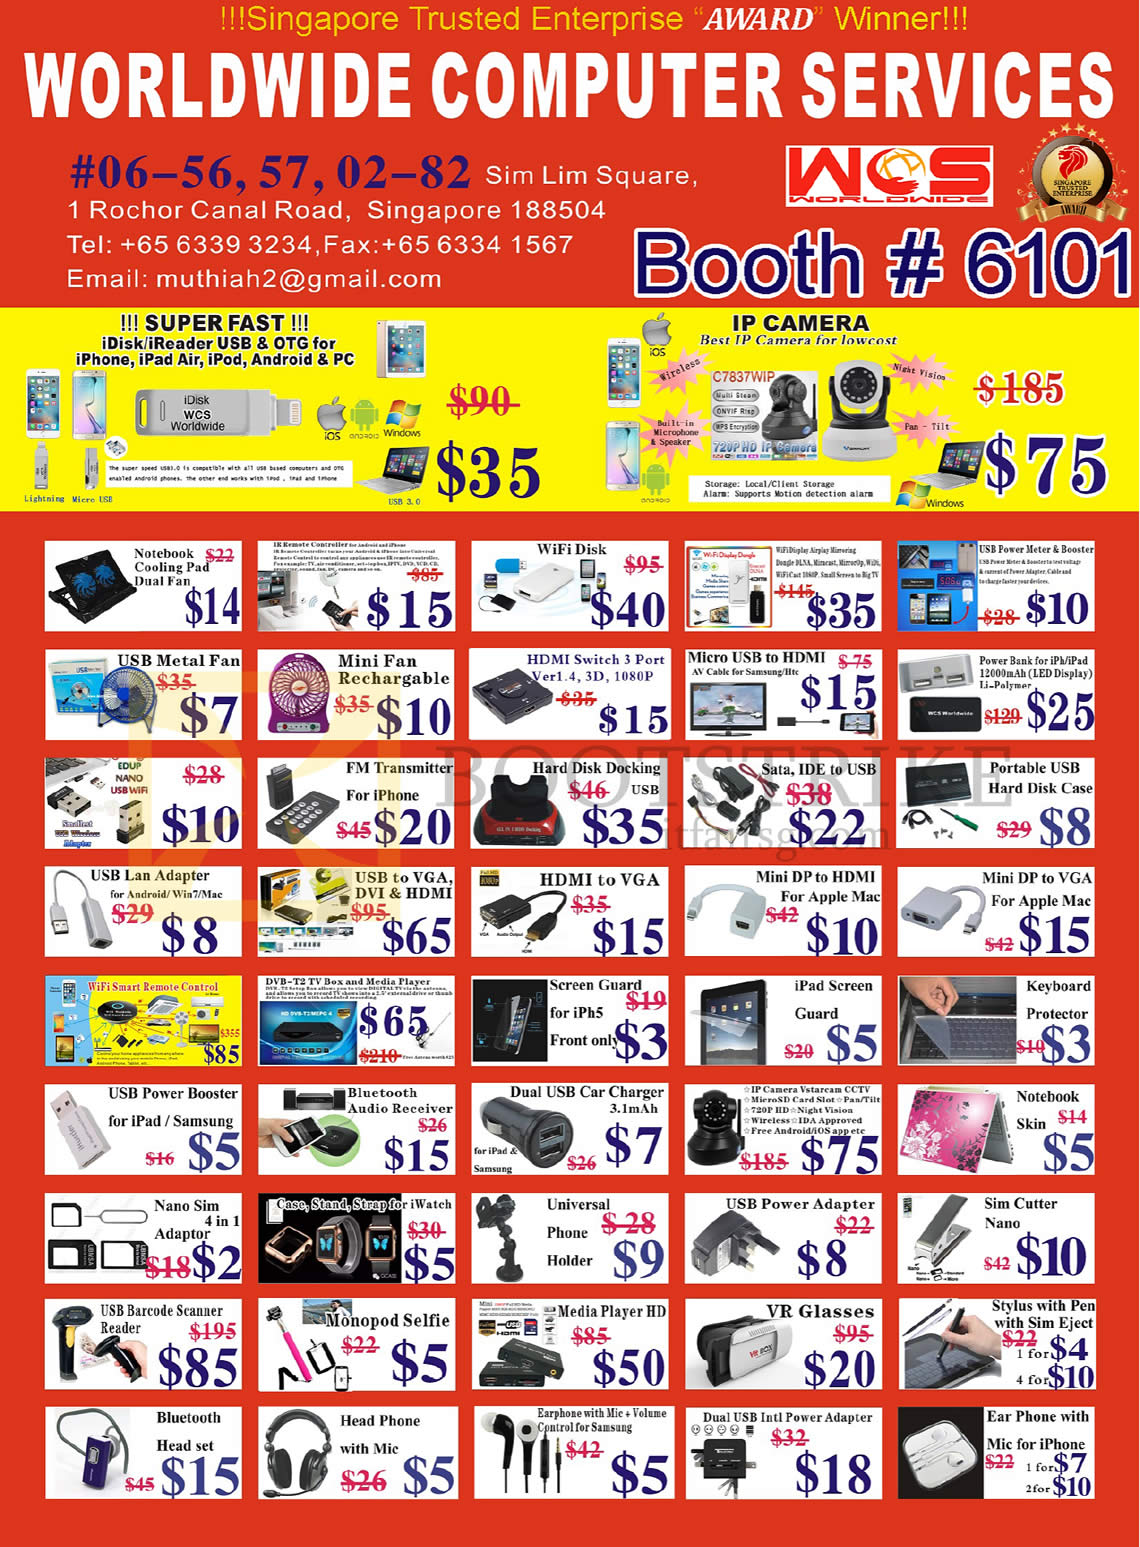 COMEX 2016 price list image brochure of Worldwide Computer Accessories IP Camera, IDisk, IReader, Notebook Cooling Pad, Wifi Disk, USB Fan, FM Transmitter, Cable, Adapter, Headset, Earphone, VR Glass, Media Player